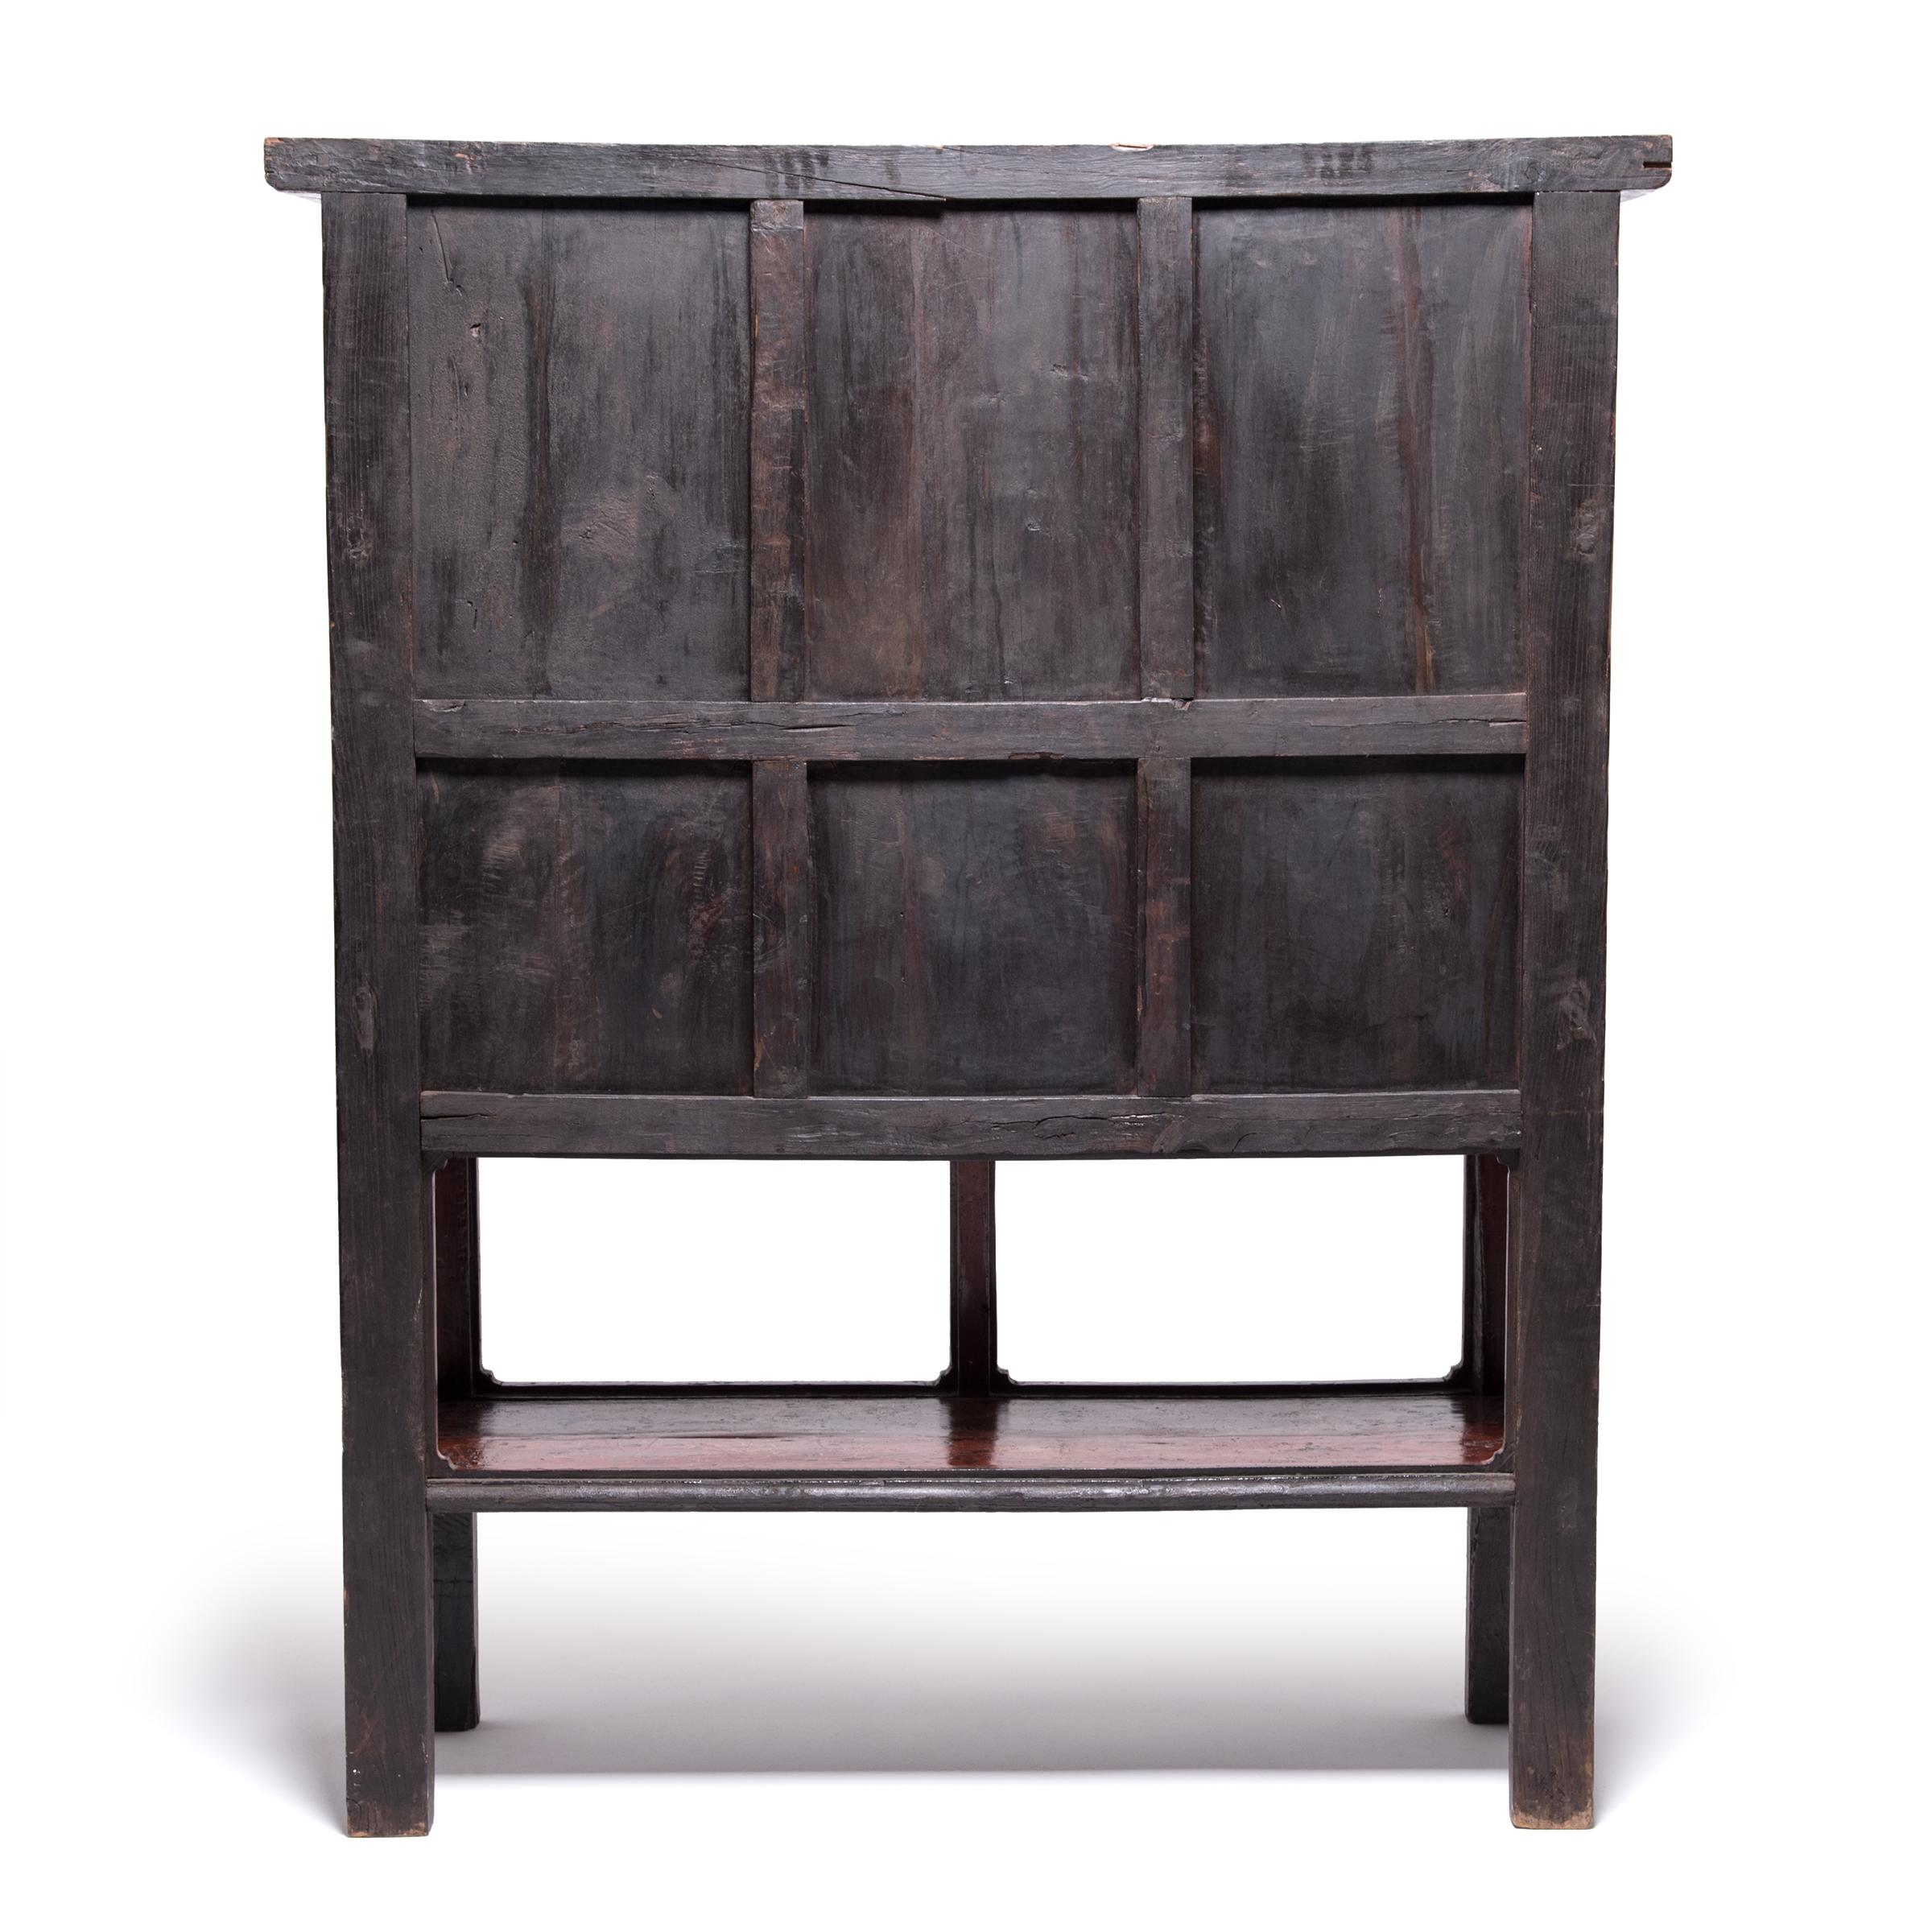 Lacquered Provincial Chinese Cabinet with Open Shelf, c. 1850